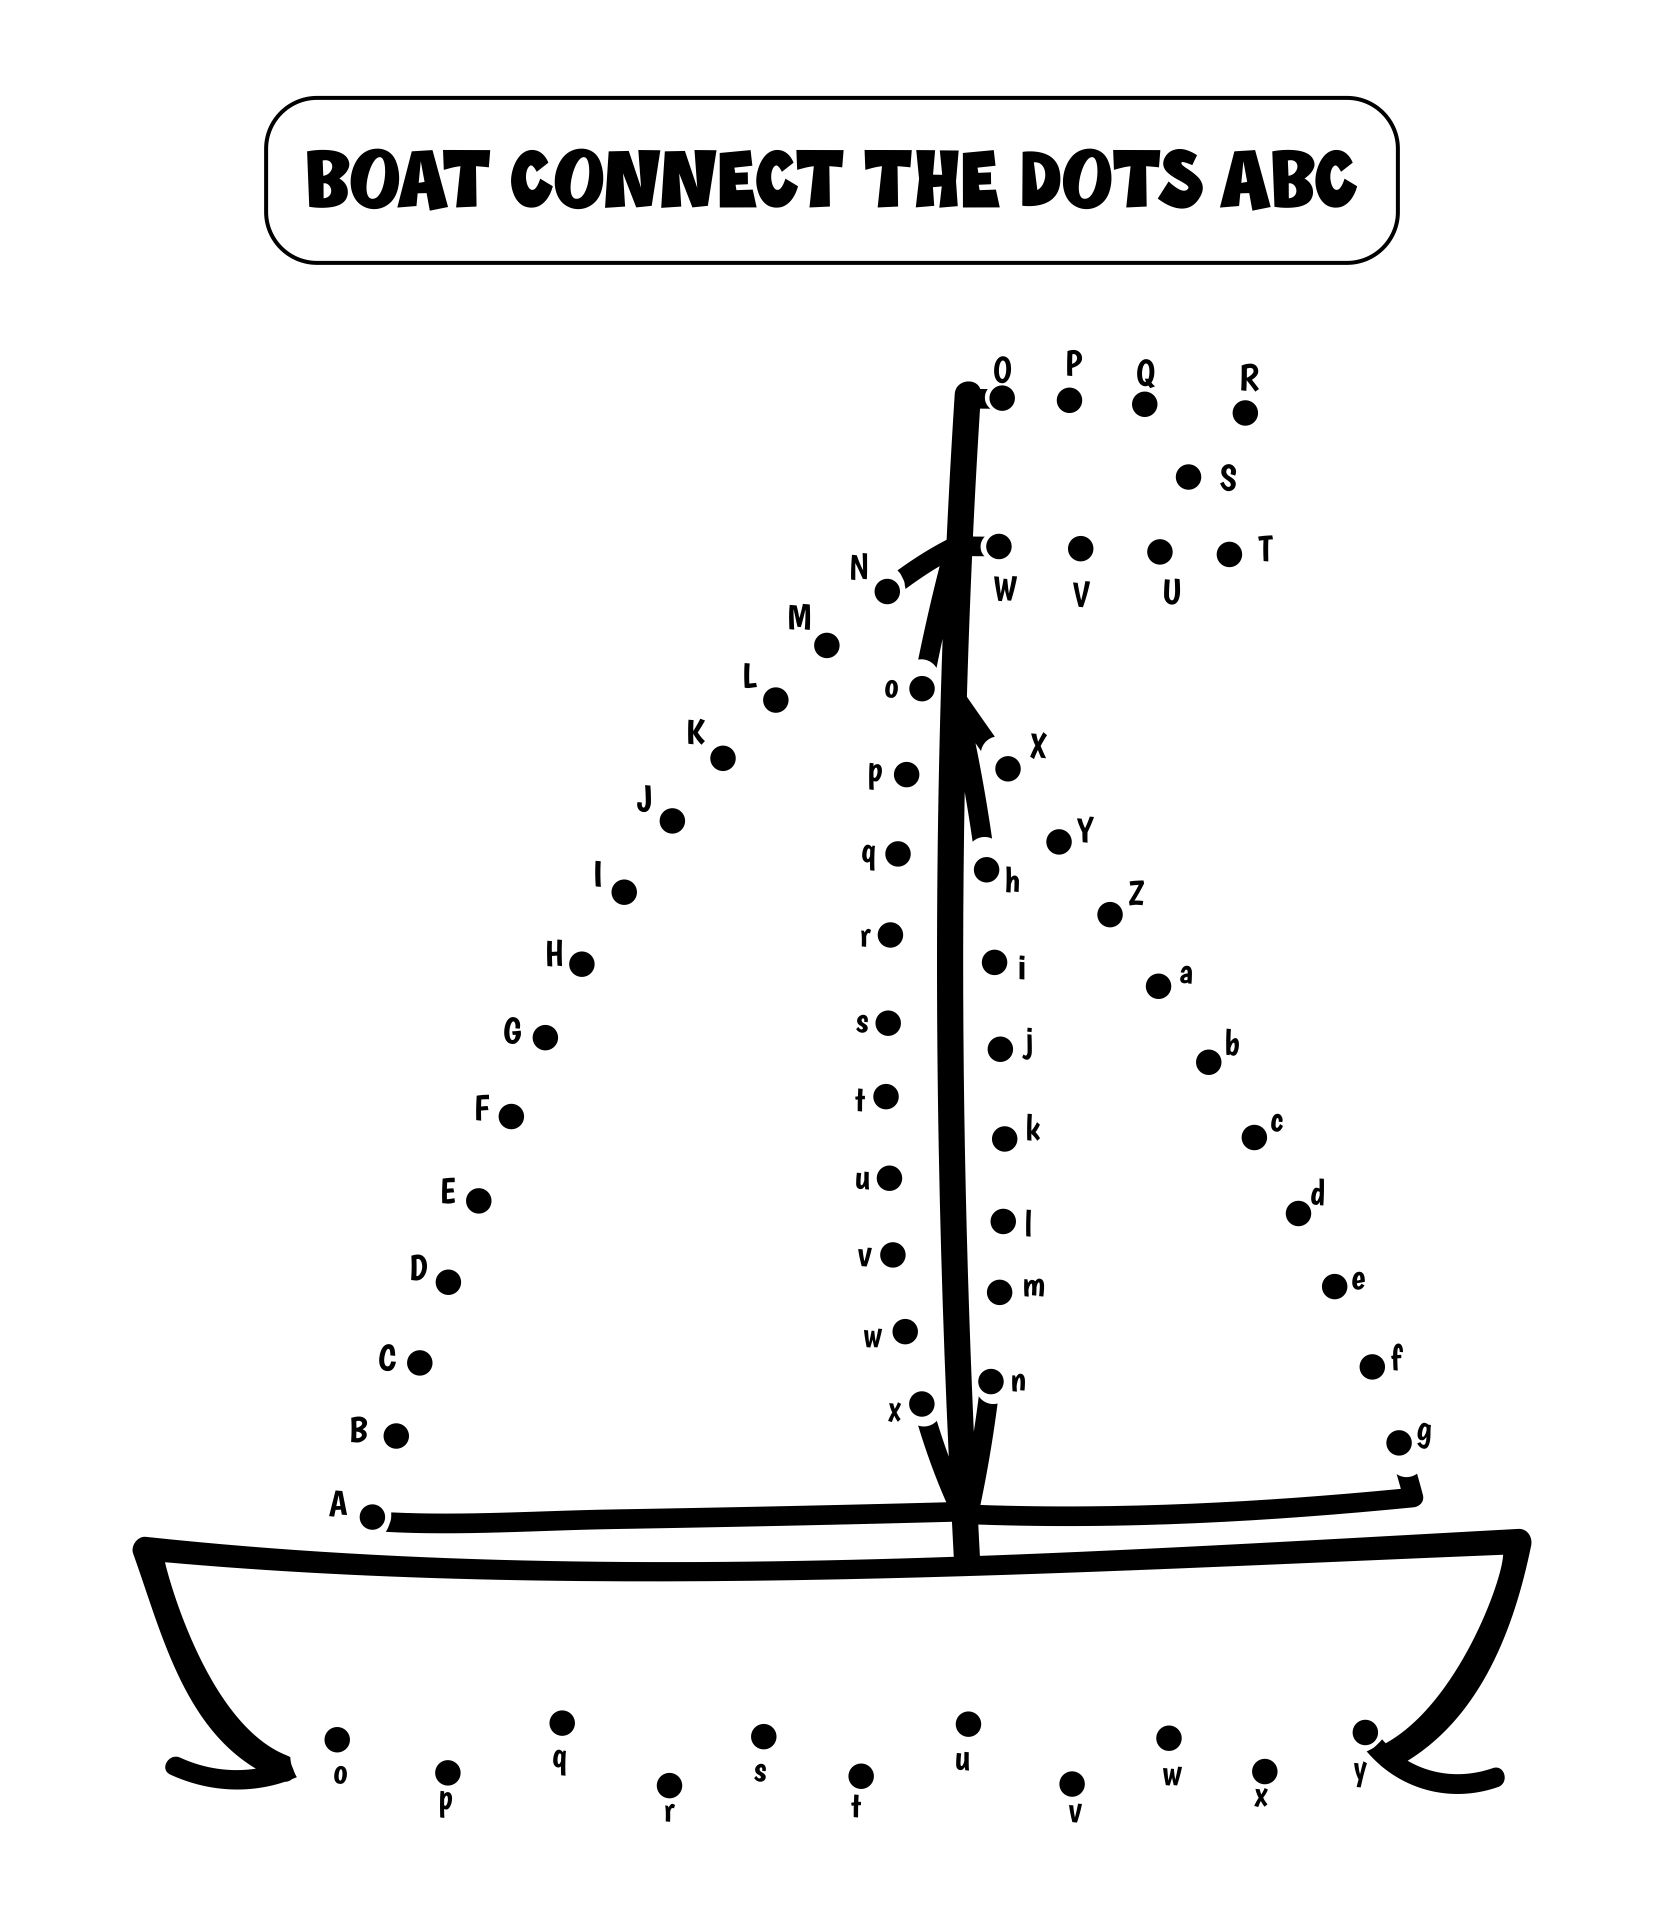 Boat Connect the Dots ABC Worksheets